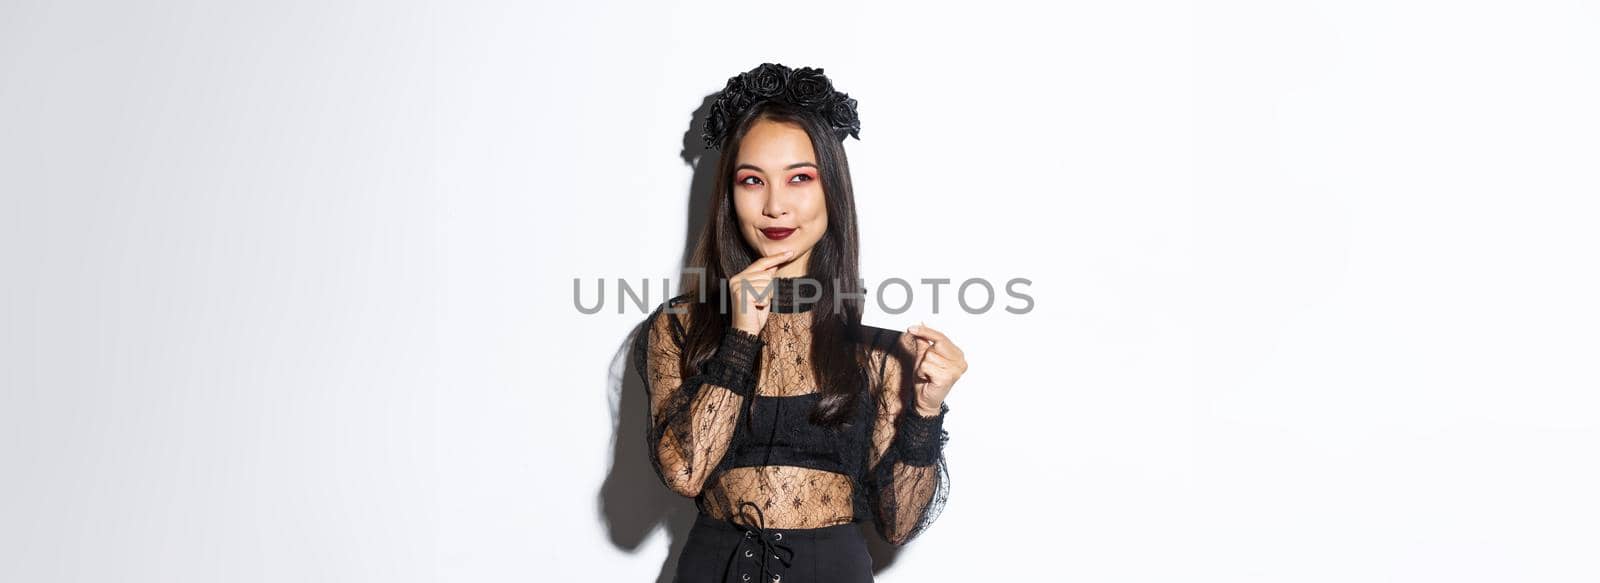 Image of smiling beautiful asian woman in gothic lace dress and wreath, thinking while holding credit card, standing over white background.